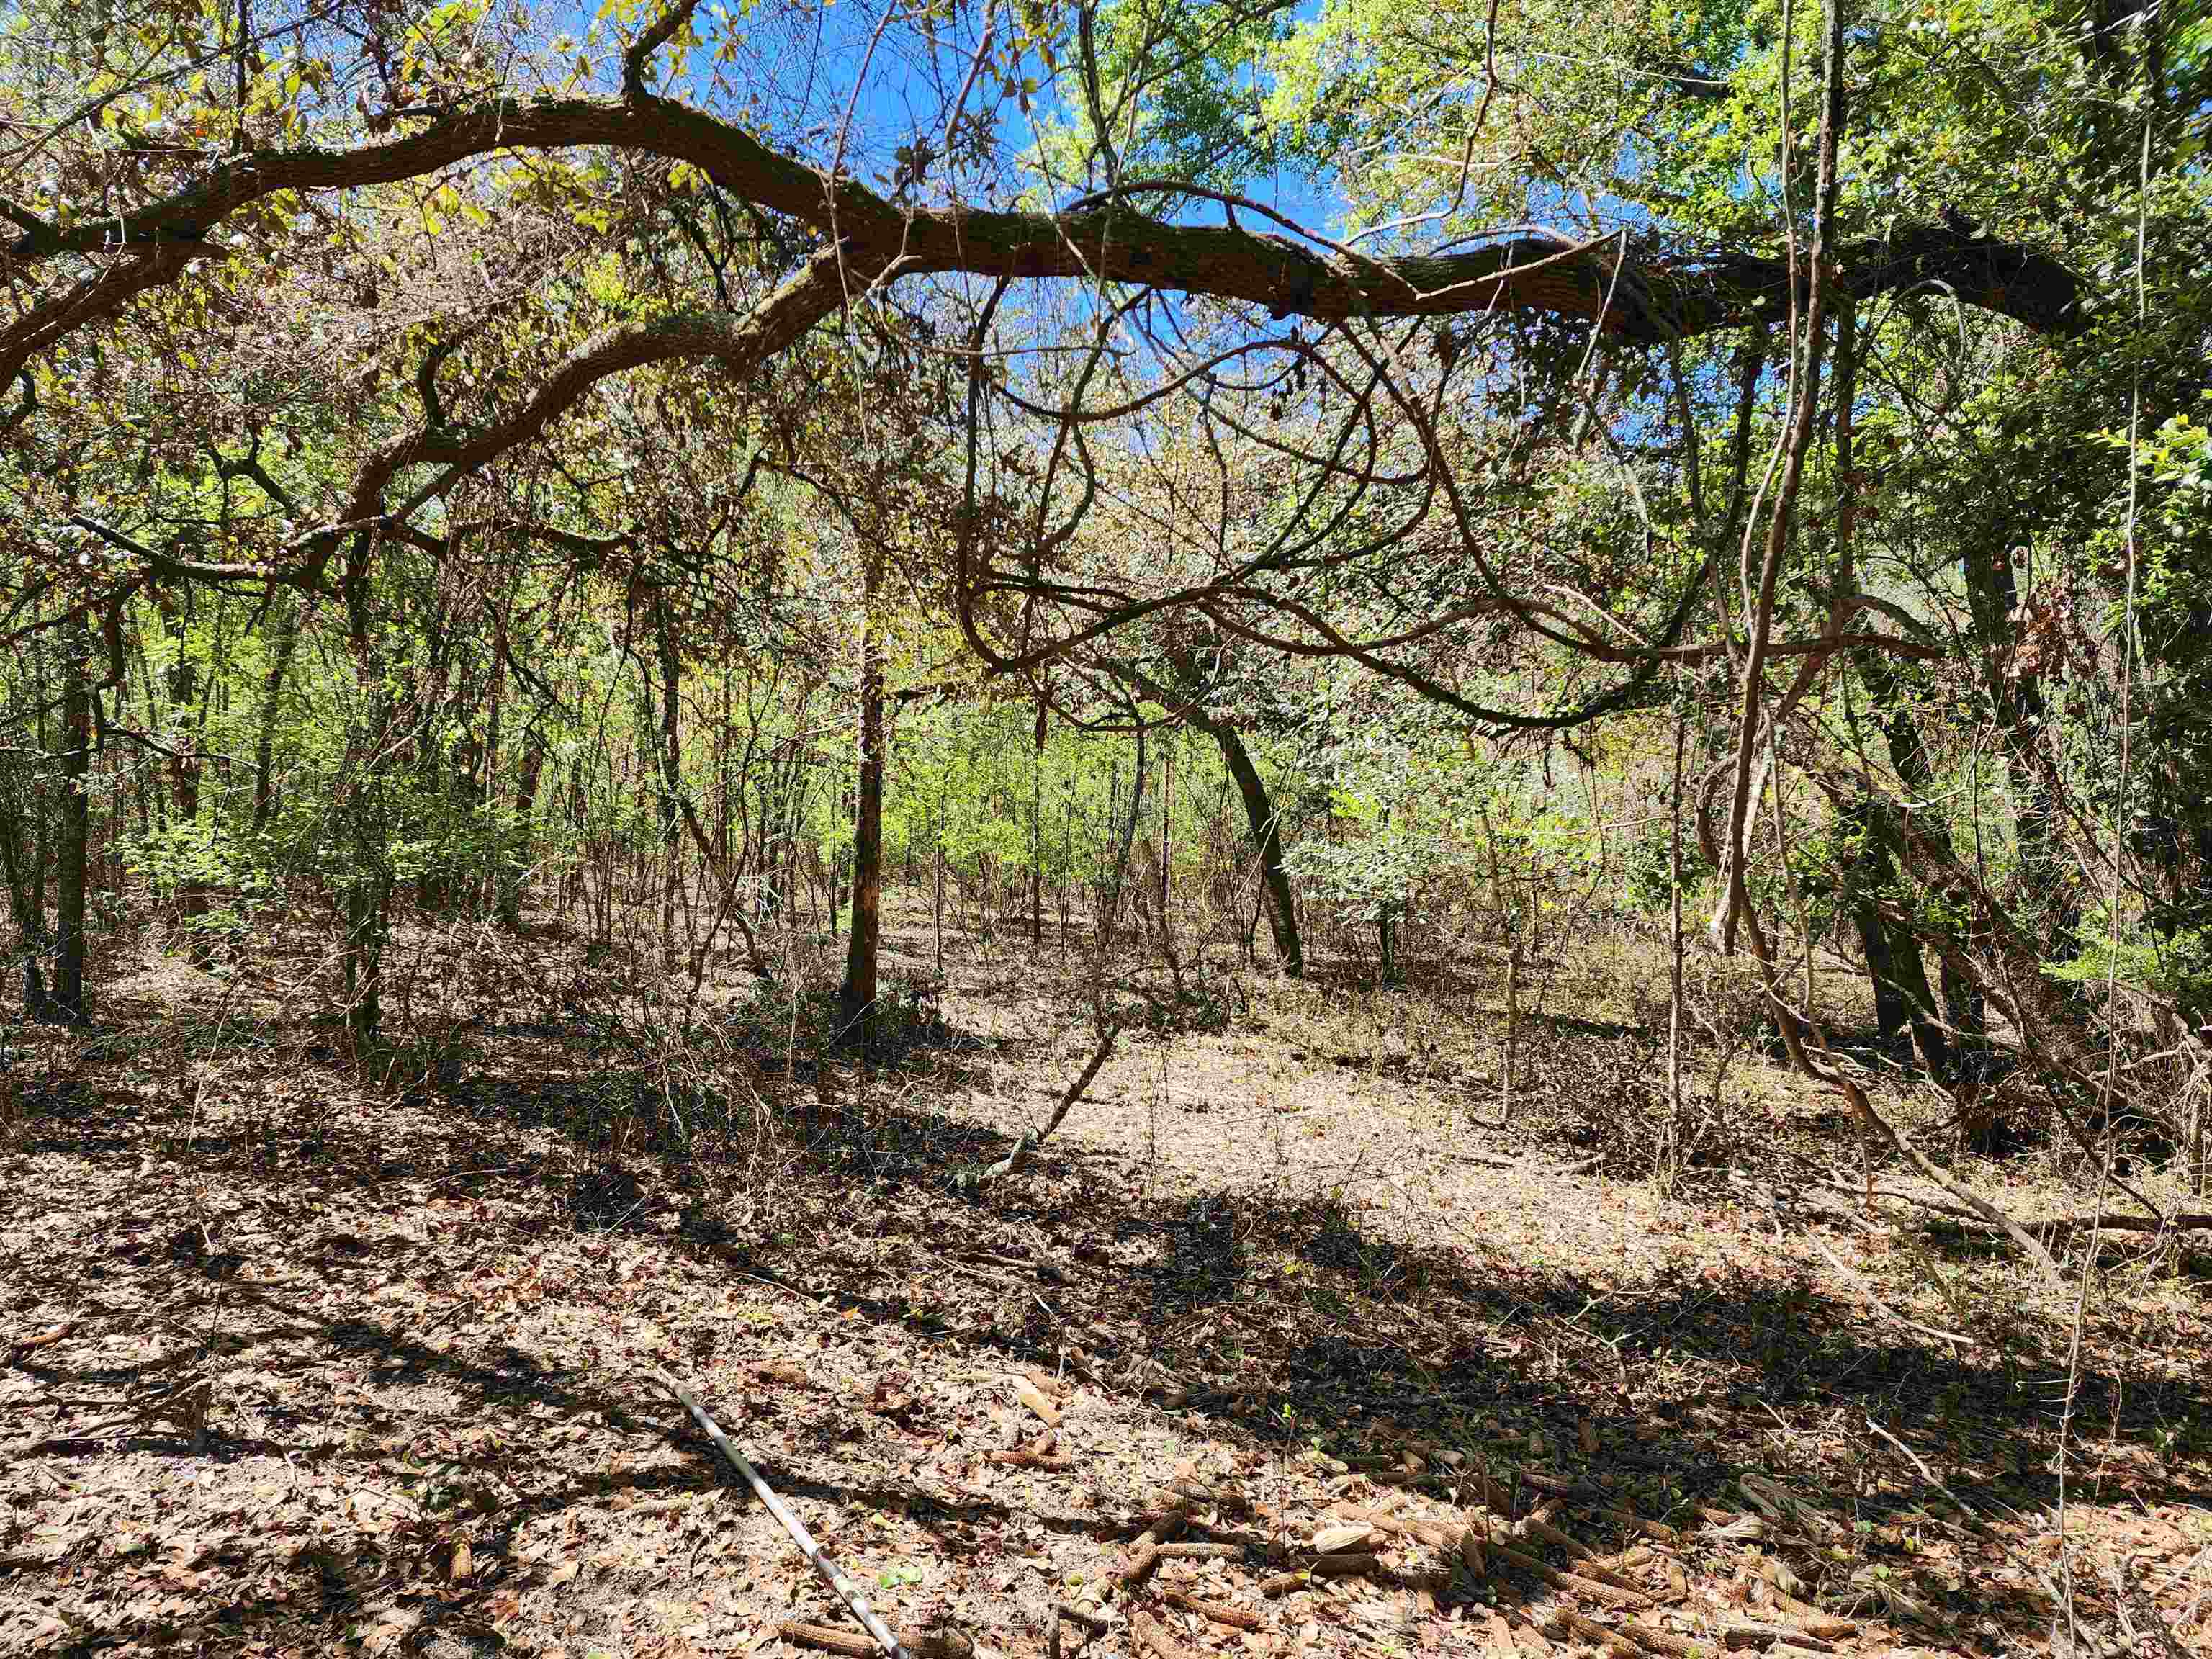 00 S. River Bend,Pinetta (Madison County),Florida 32350,Lots and land,S. River Bend,369966